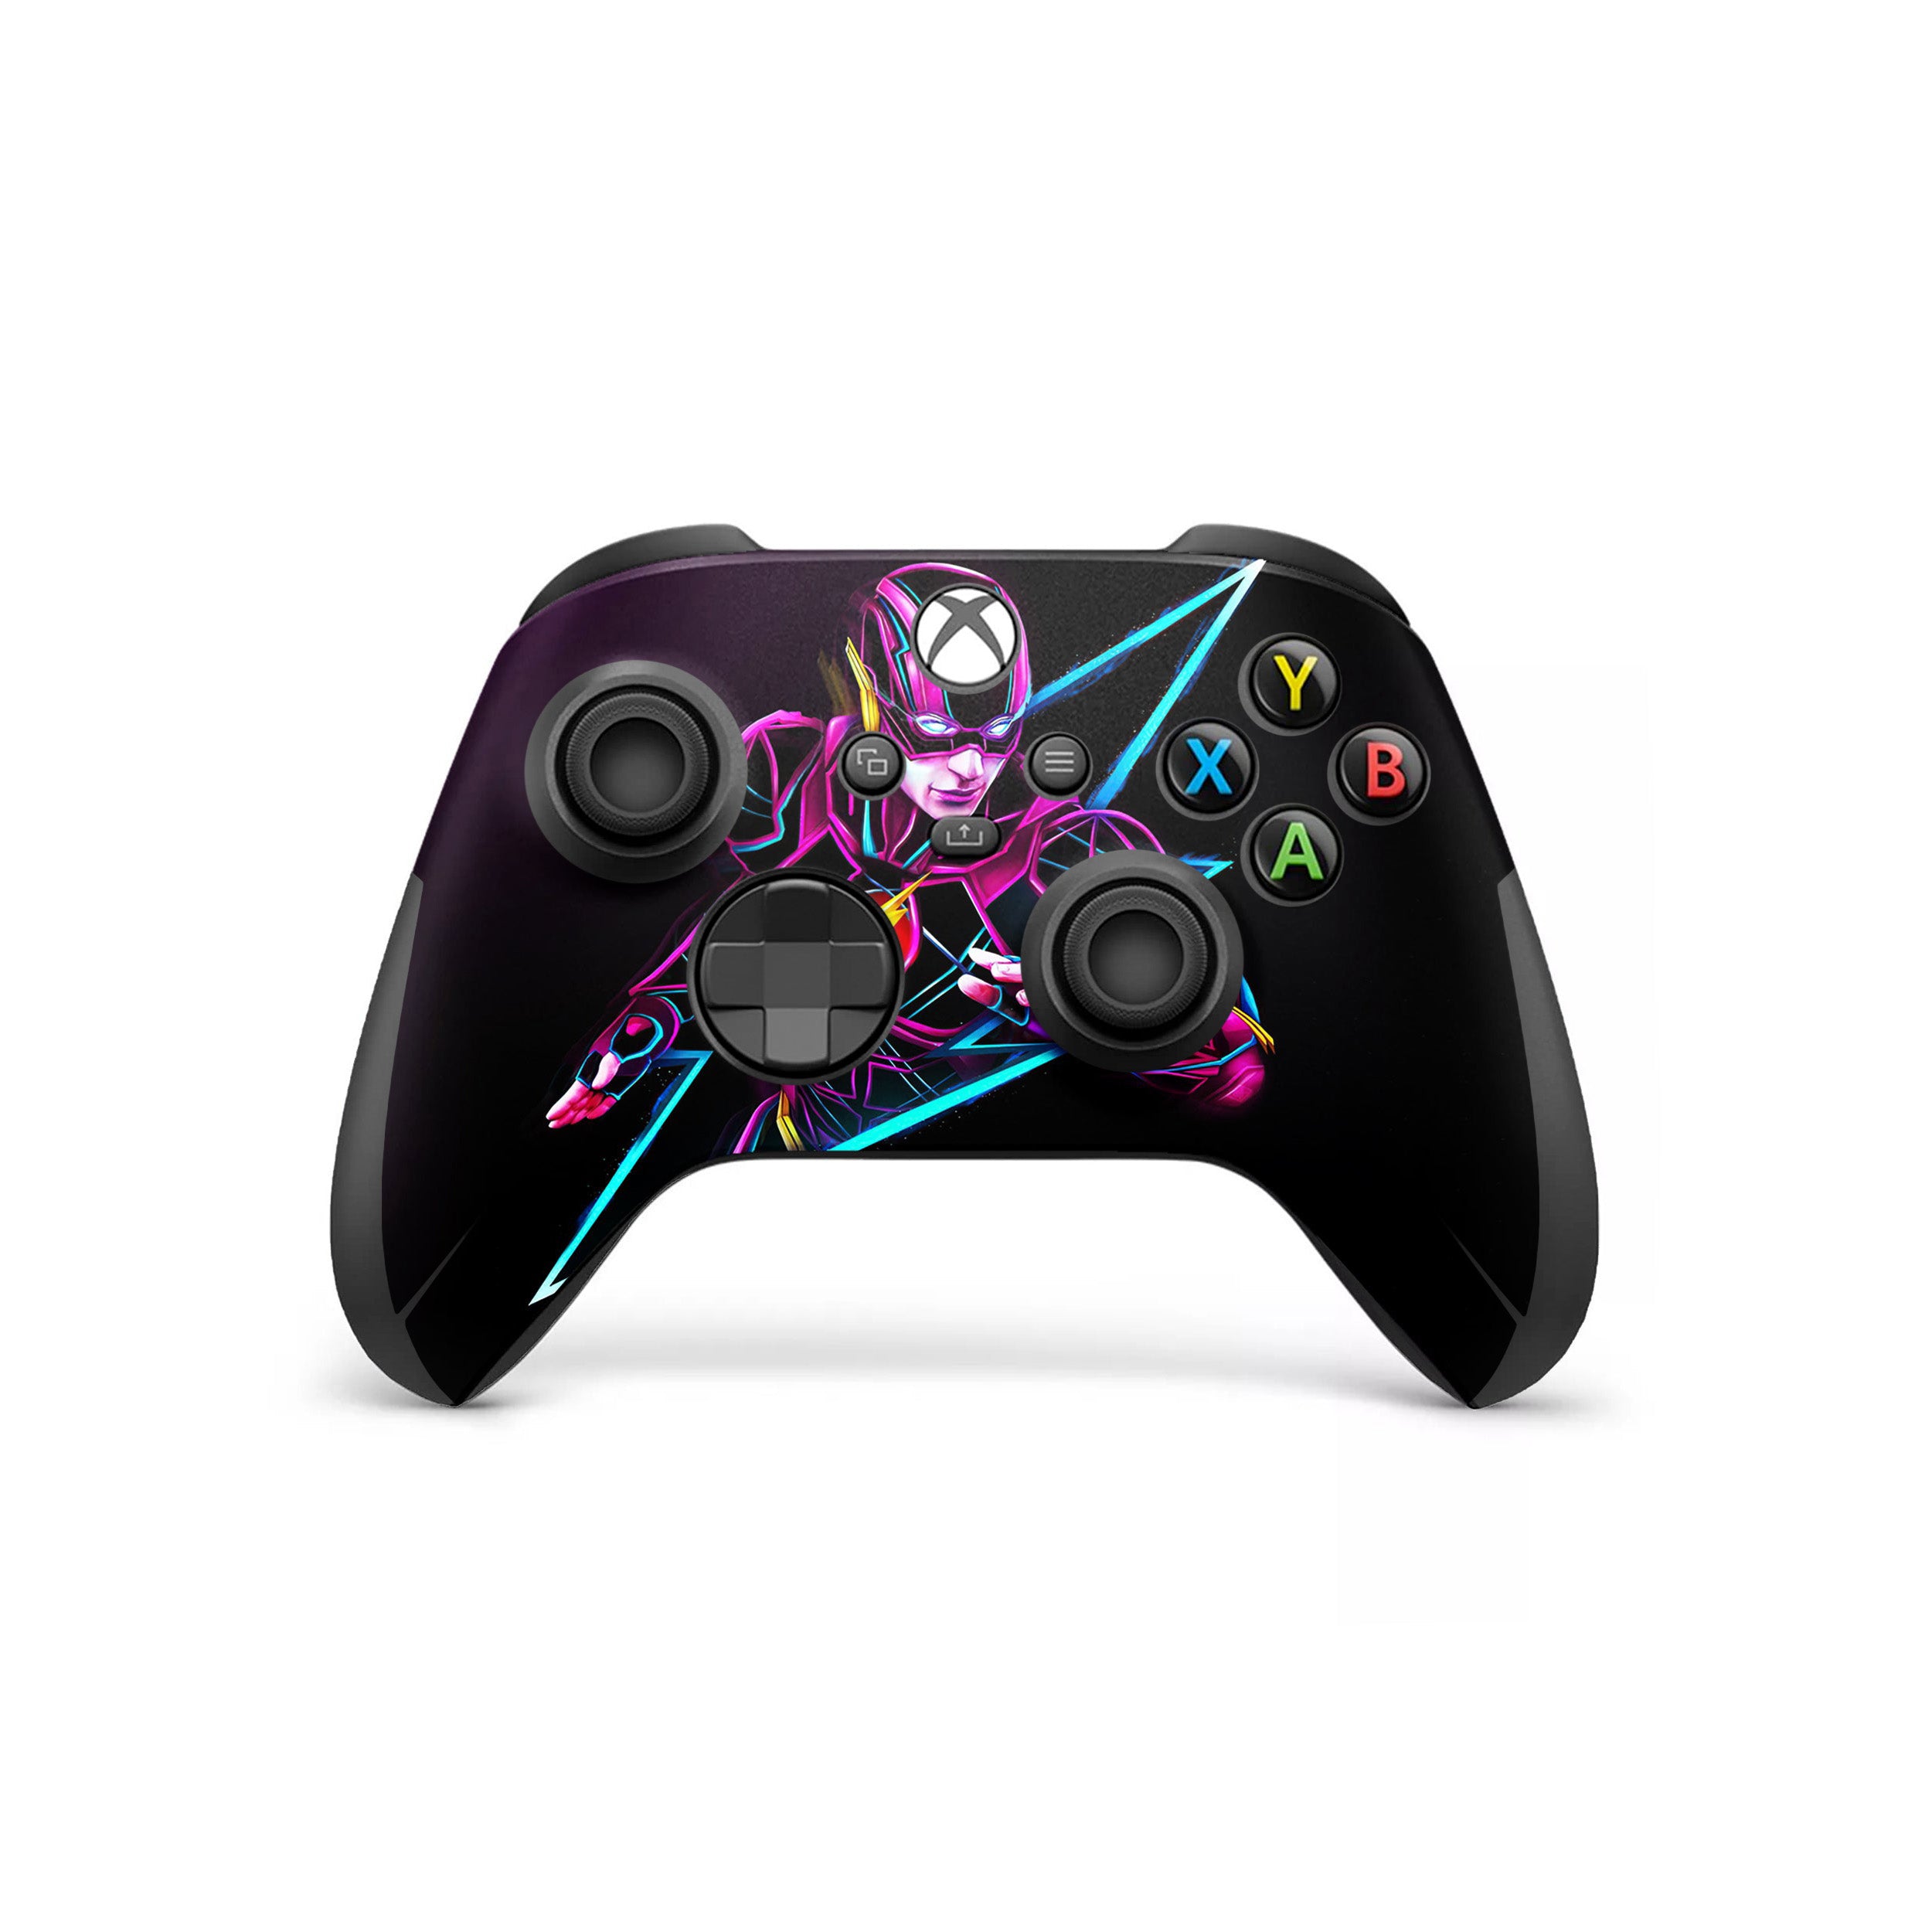 A video game skin featuring a DC Comics Flash design for the Xbox Wireless Controller.